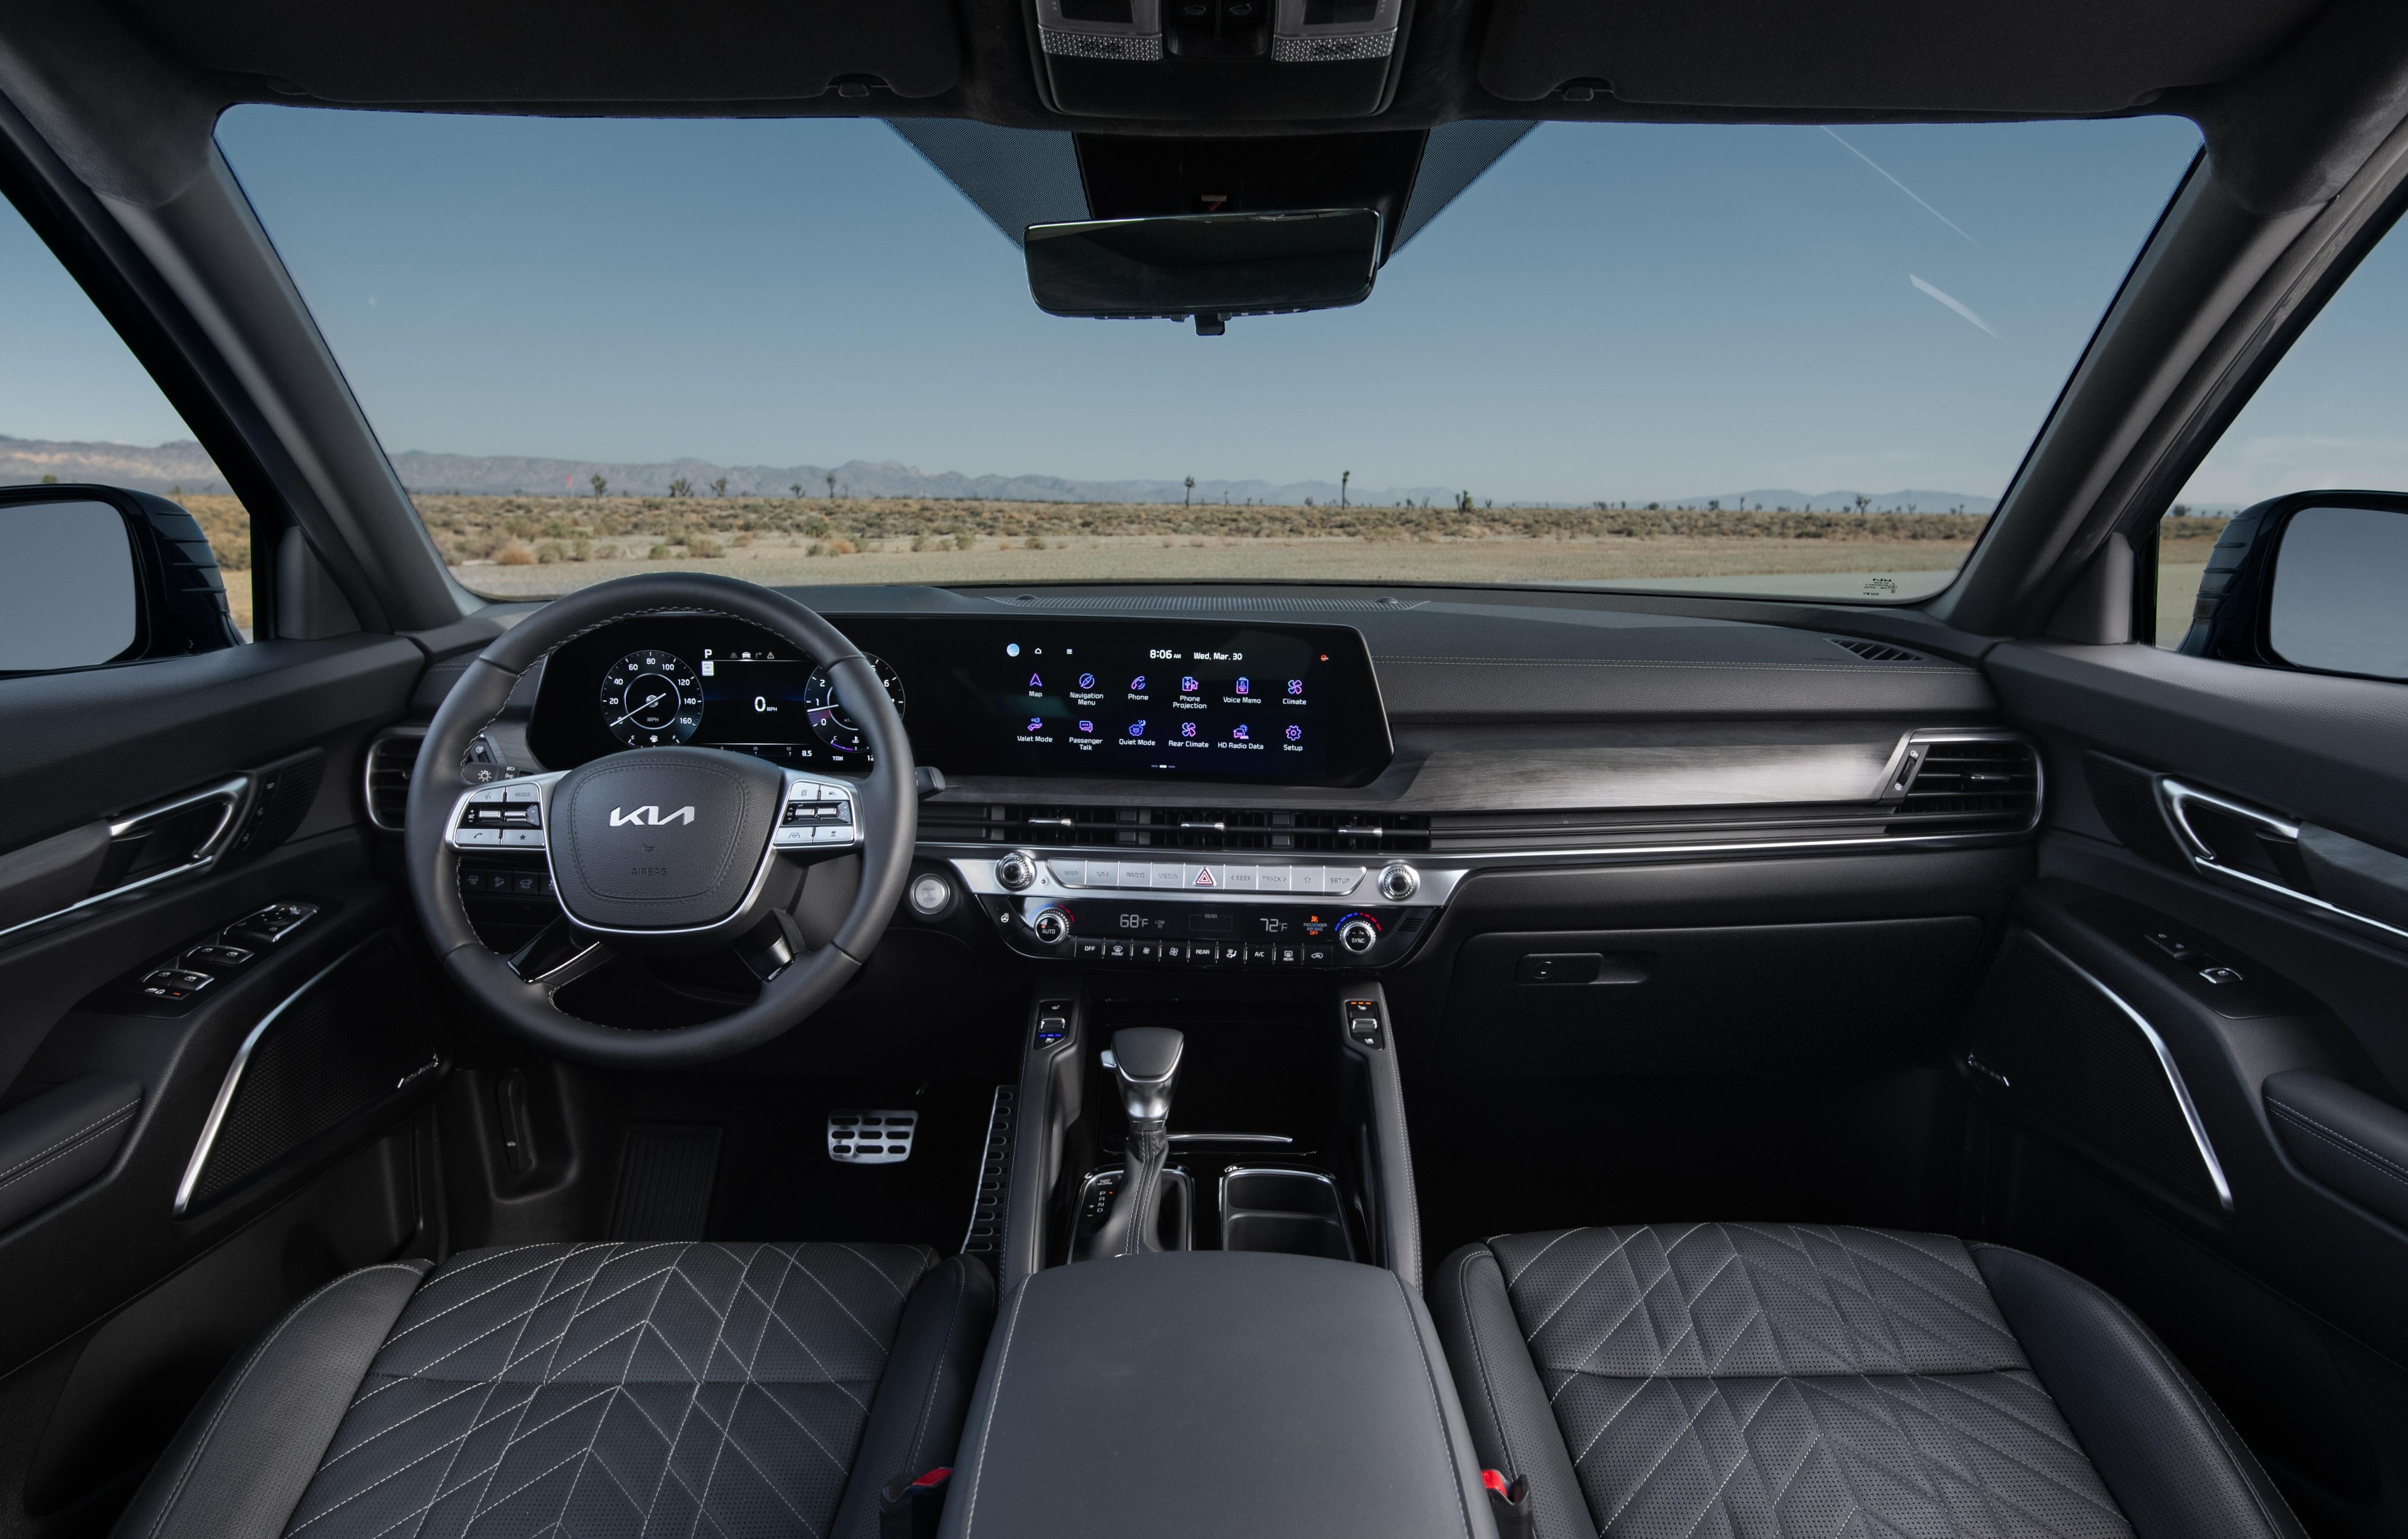 A look at the cabin layout of the latest Kia Telluride.